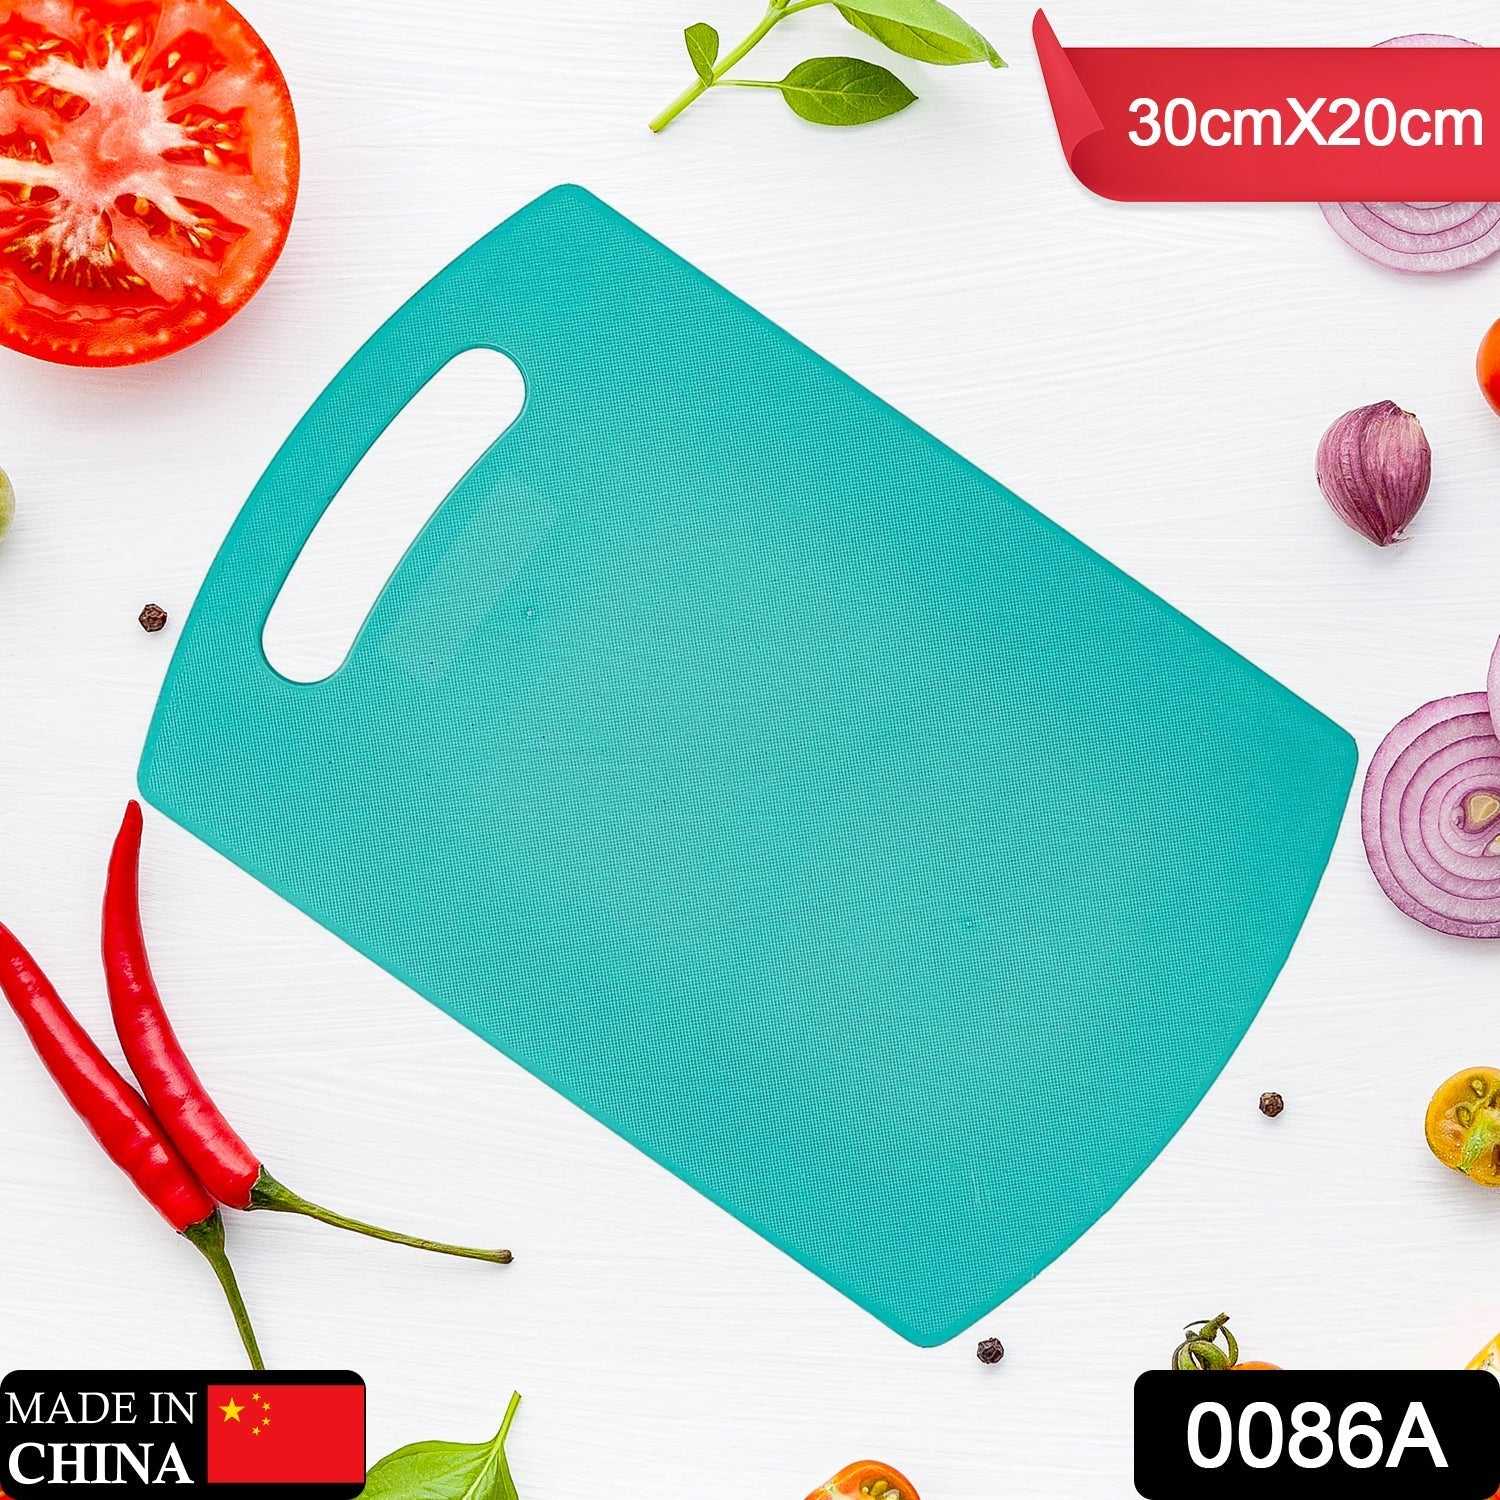 0086A Chopping Board Cutting Pad Plastic for Home and Kitchen Accessories Items Tools Gadgets for Cutting Vegetables Non Sleep Anti Skid dd